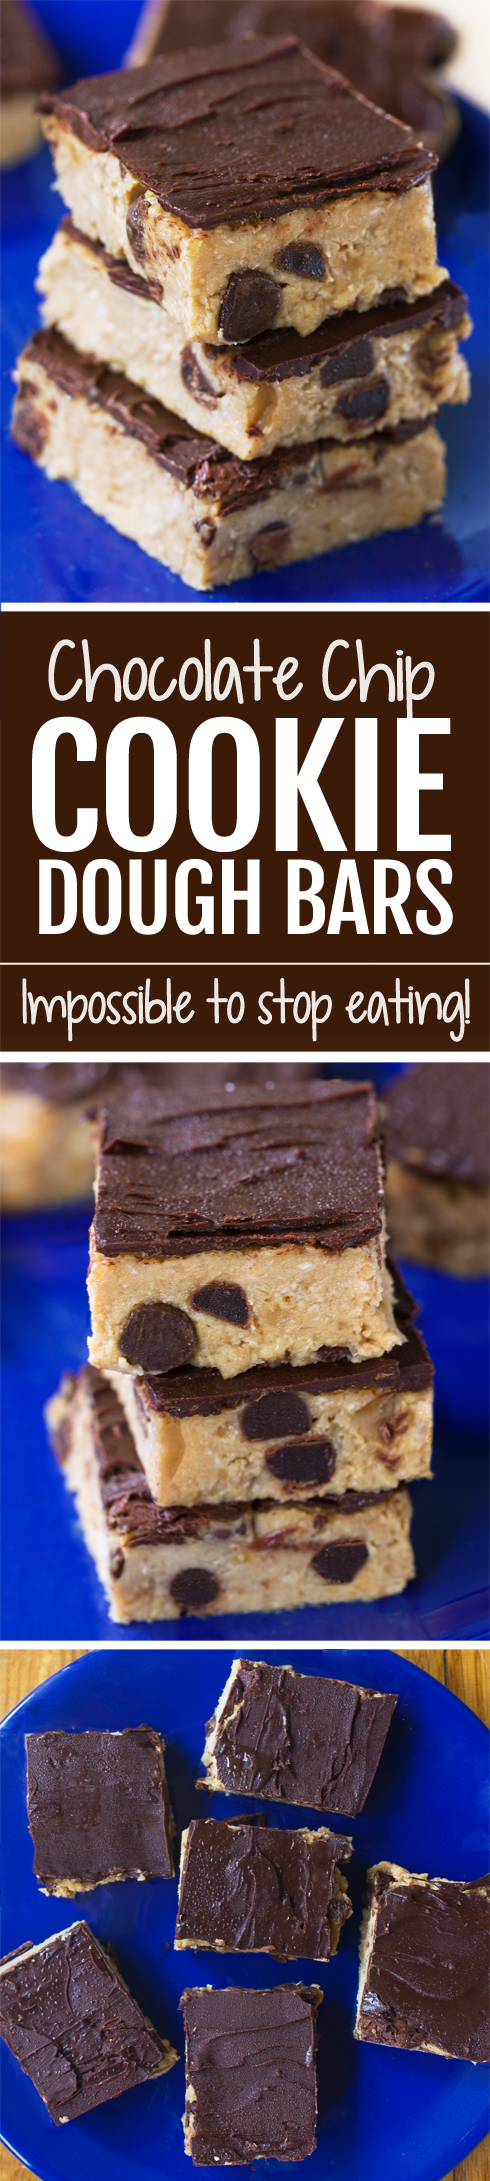 Unbaked Cookie Dough Bars - These are UNREAL!